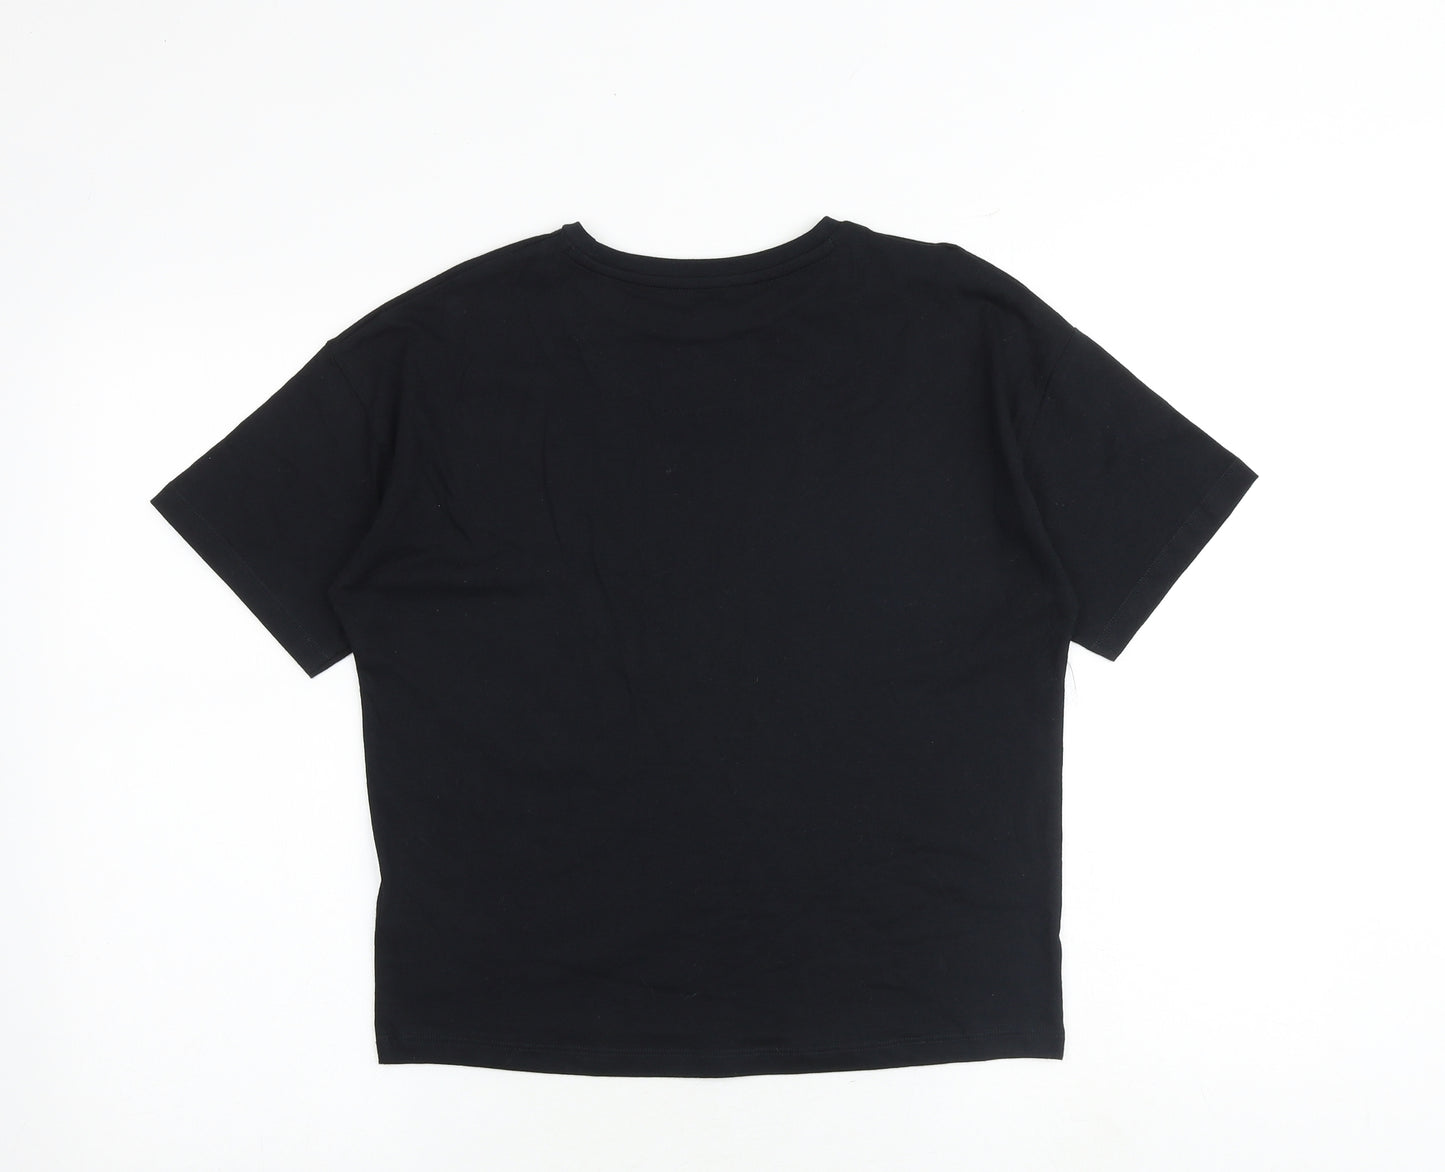 Marks and Spencer Boys Black Cotton Basic T-Shirt Size 11-12 Years Round Neck Pullover - Pikachu